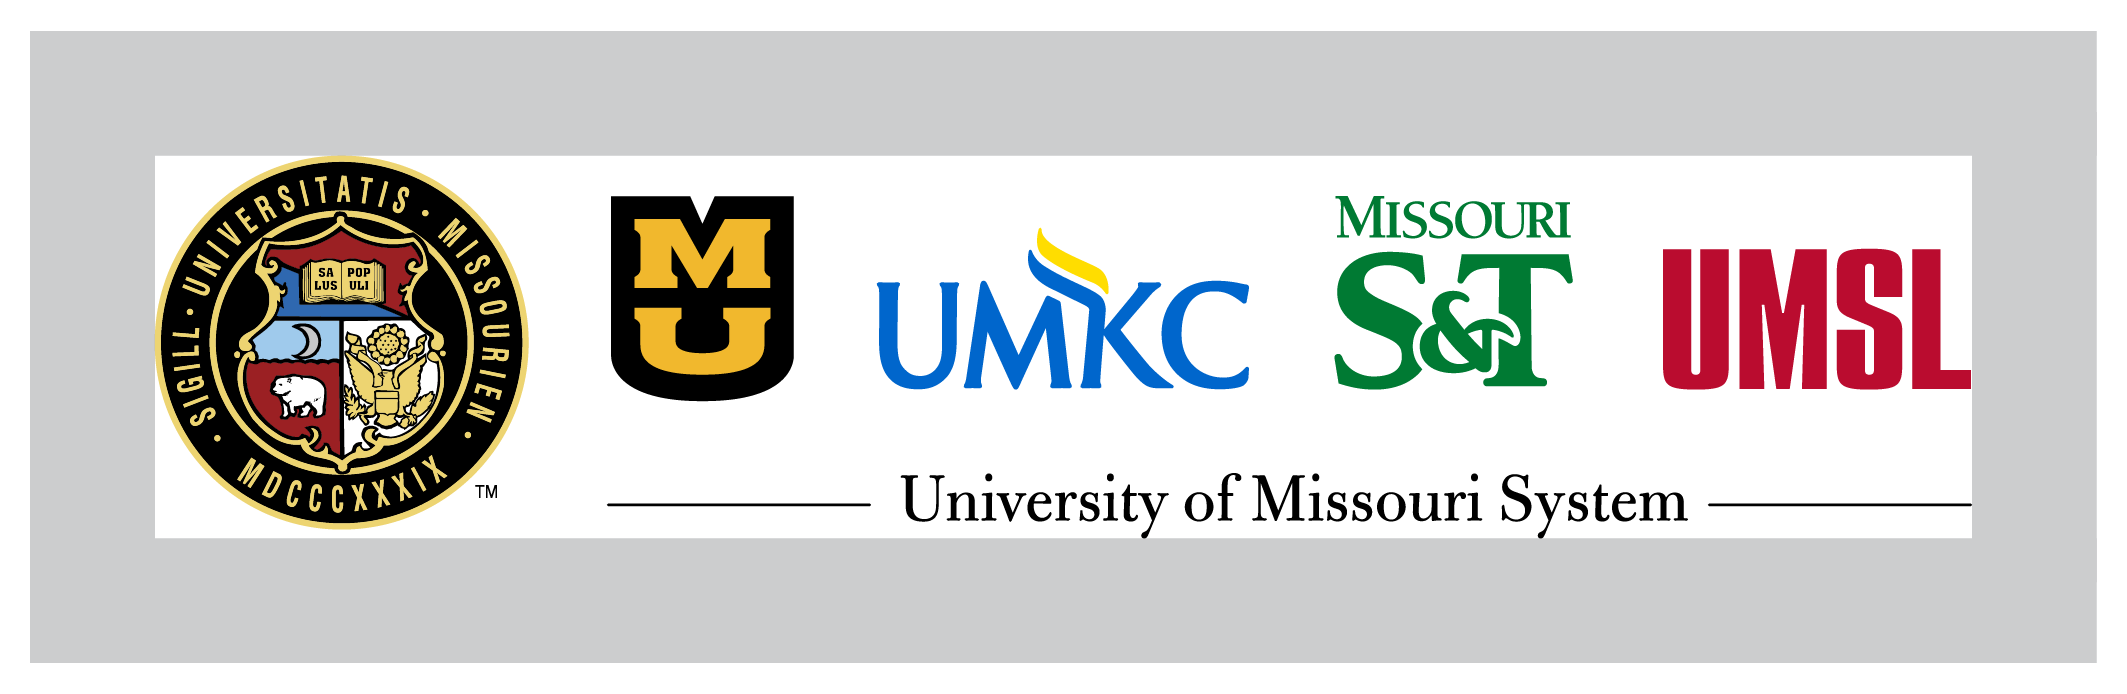 Horizontal UM System logo lockup with the UM Seal to the left of all four campus logos: University of Missouri-Columbia, University of Missouri-Kansas City, Missouri Science and Technology, University of Missouri-St. Louis